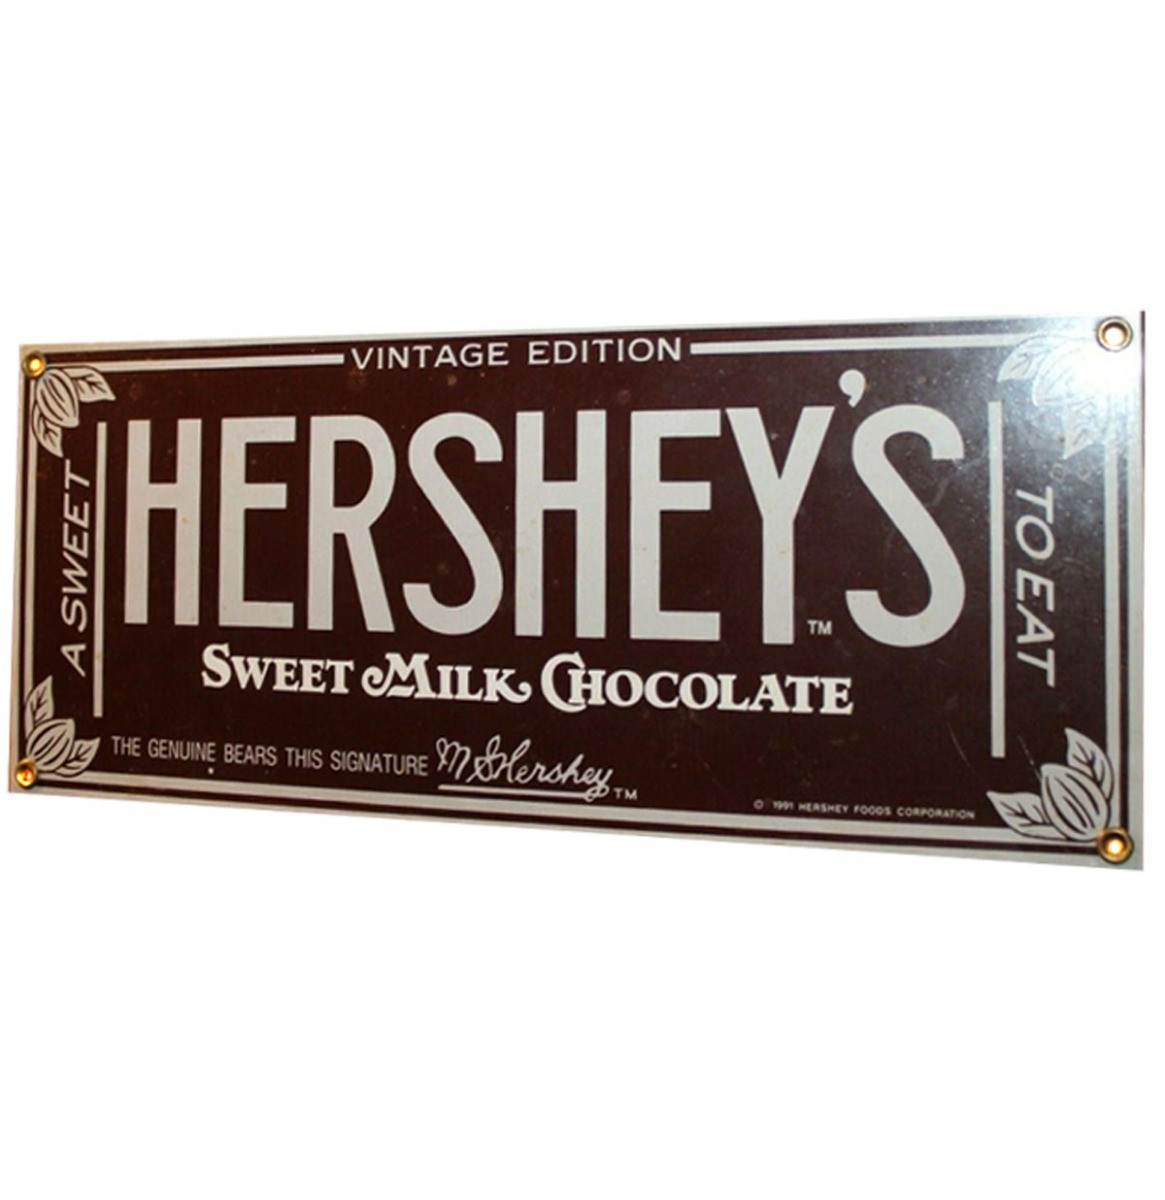 Hershey&apos;s Sweet Milk Chocolate Emaille Bord - 32 x 13 cm - Ande Rooney - 1991